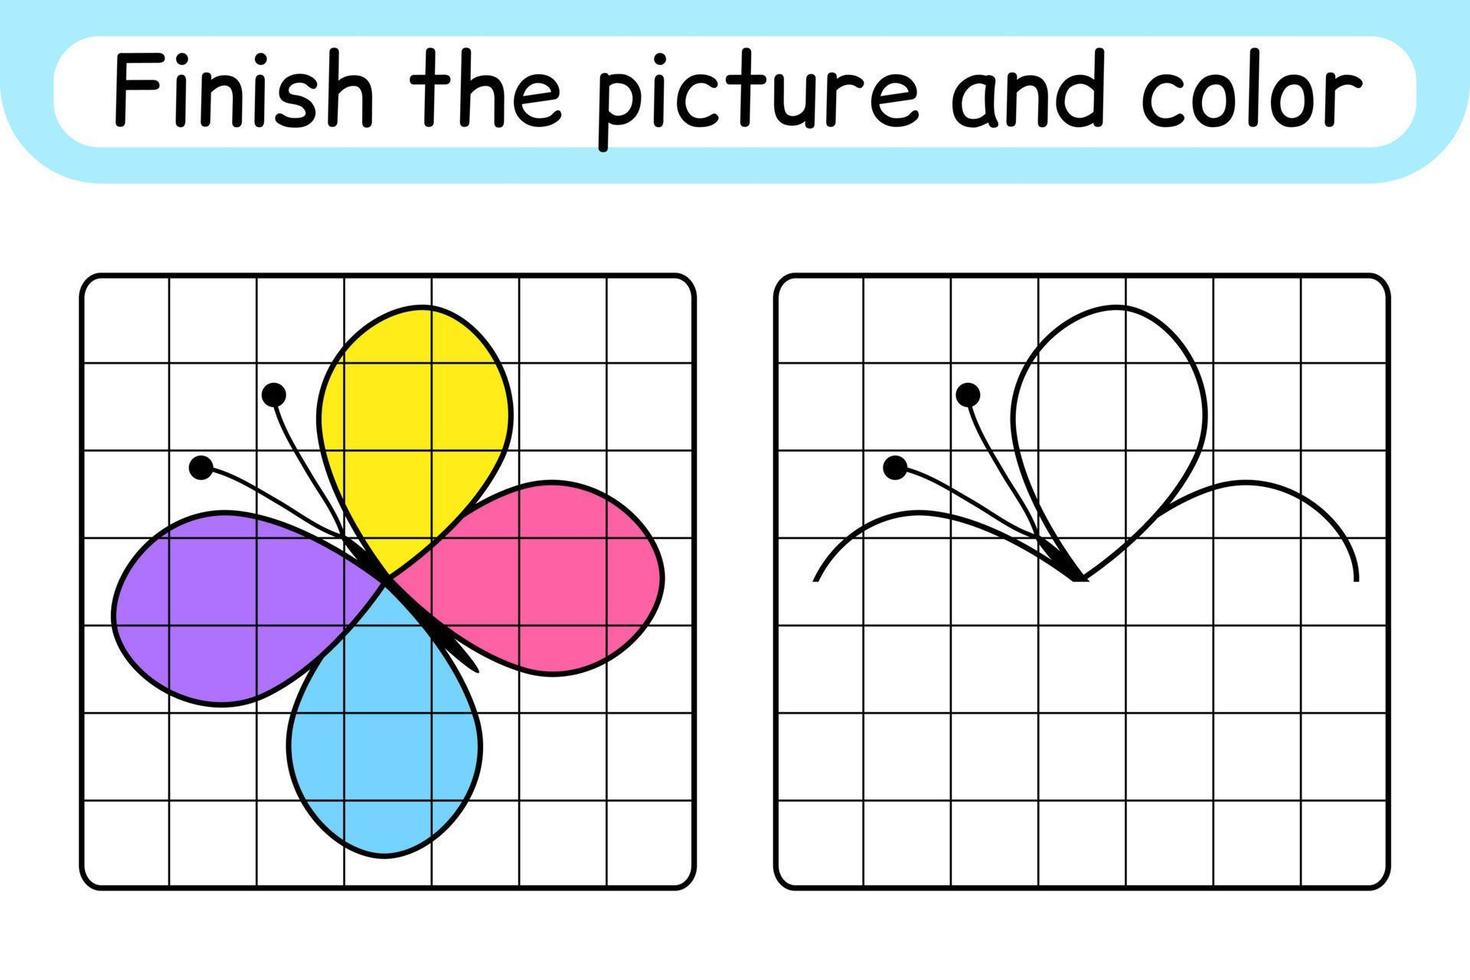 Complete the picture butterfly. Copy the picture and color. Finish the image. Coloring book. Educational drawing exercise game for children vector